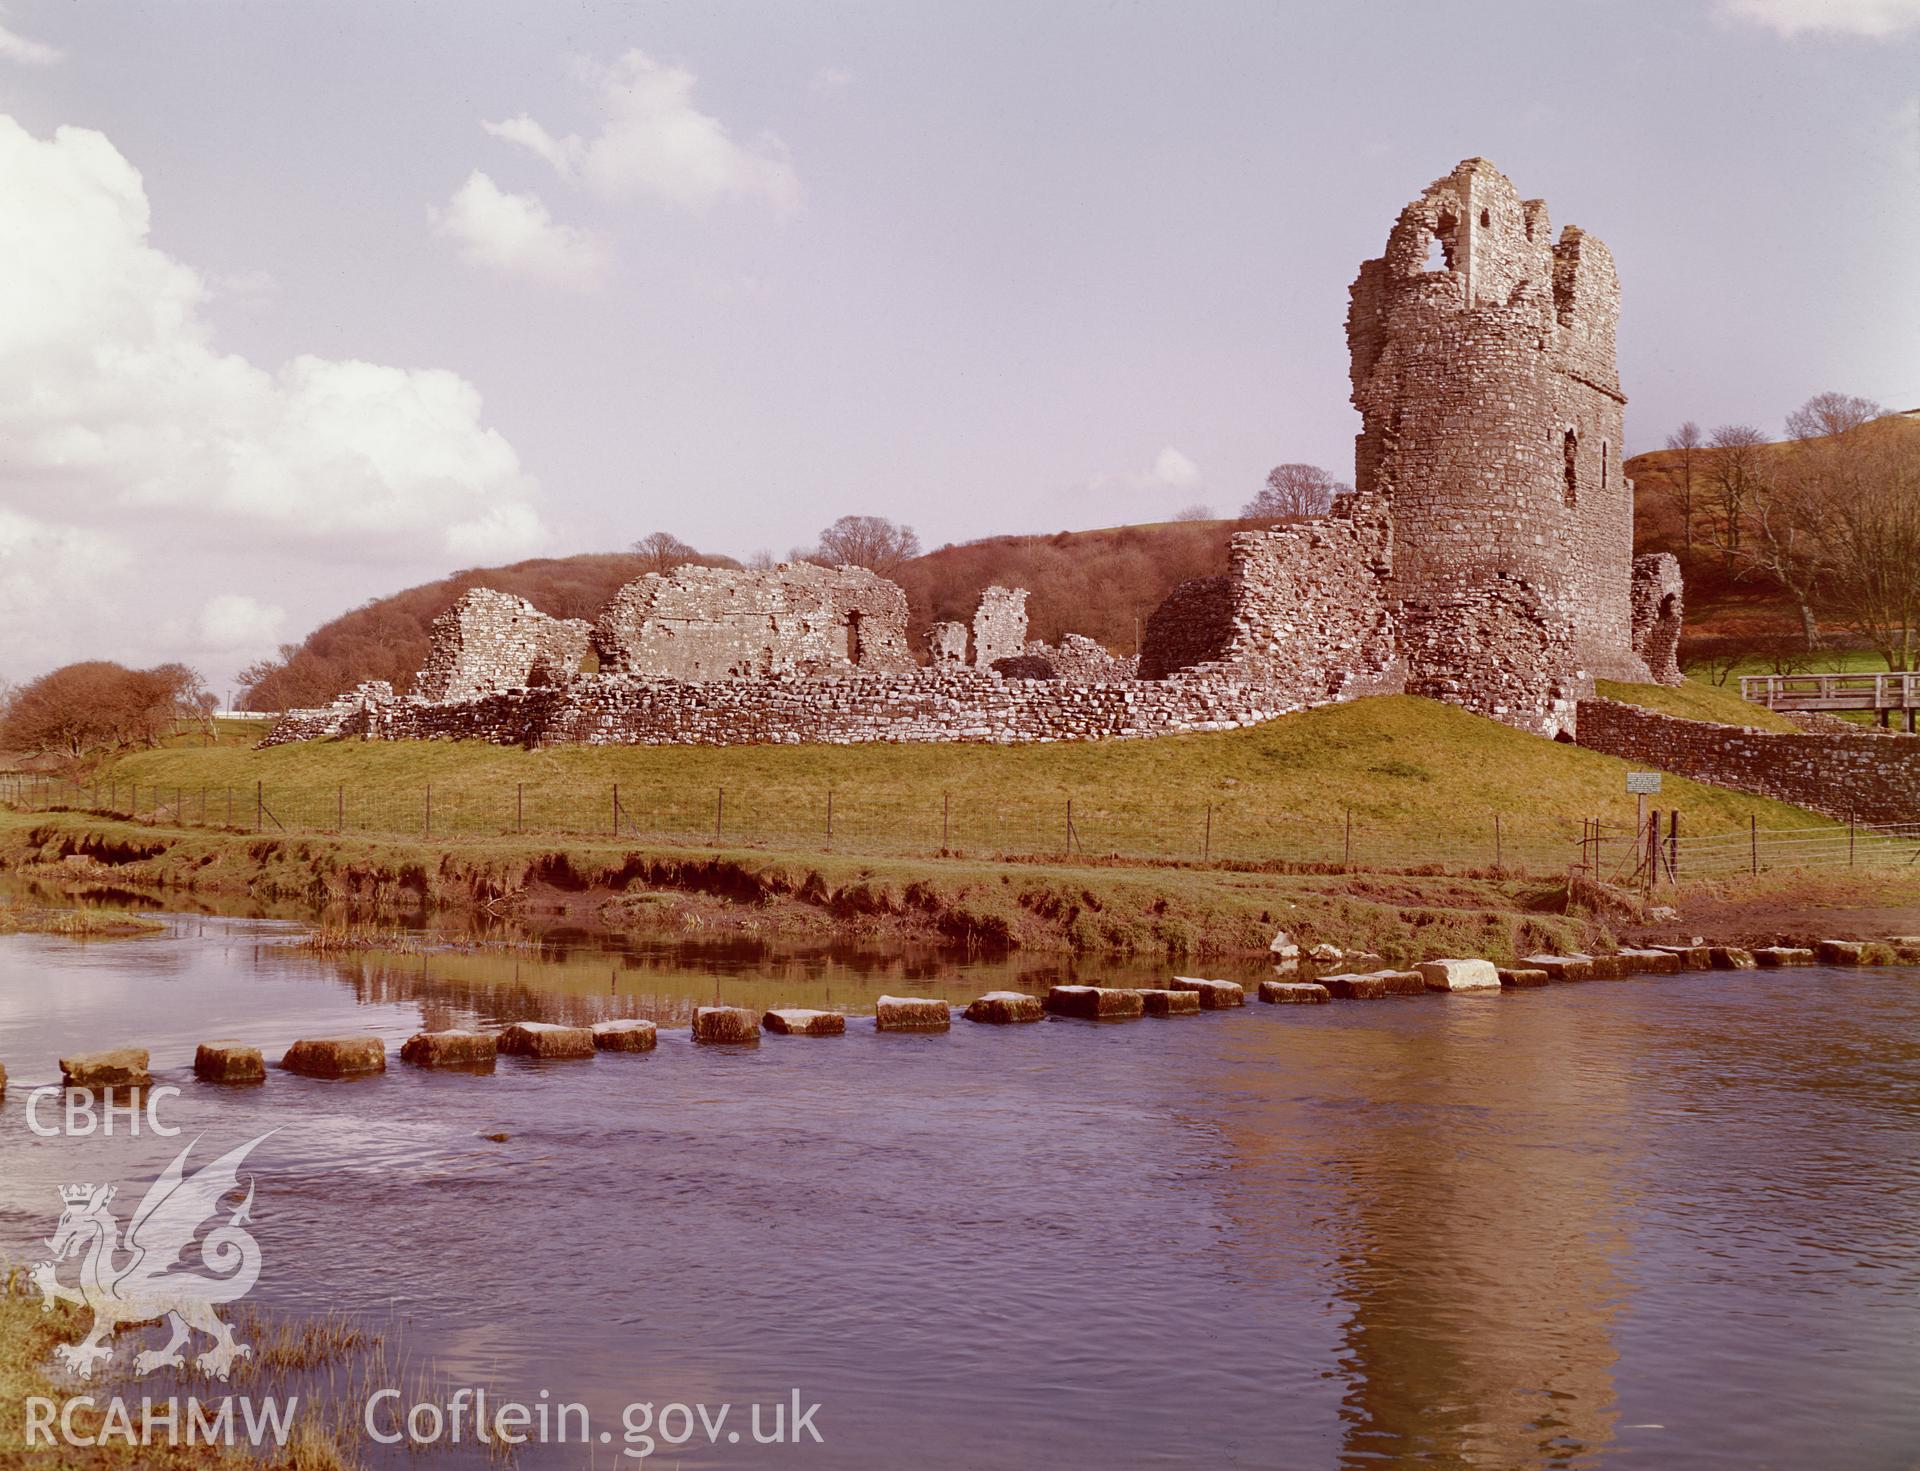 RCAHMW colour transparency showing Ogmore Castle taken by RCAHMW, undated.